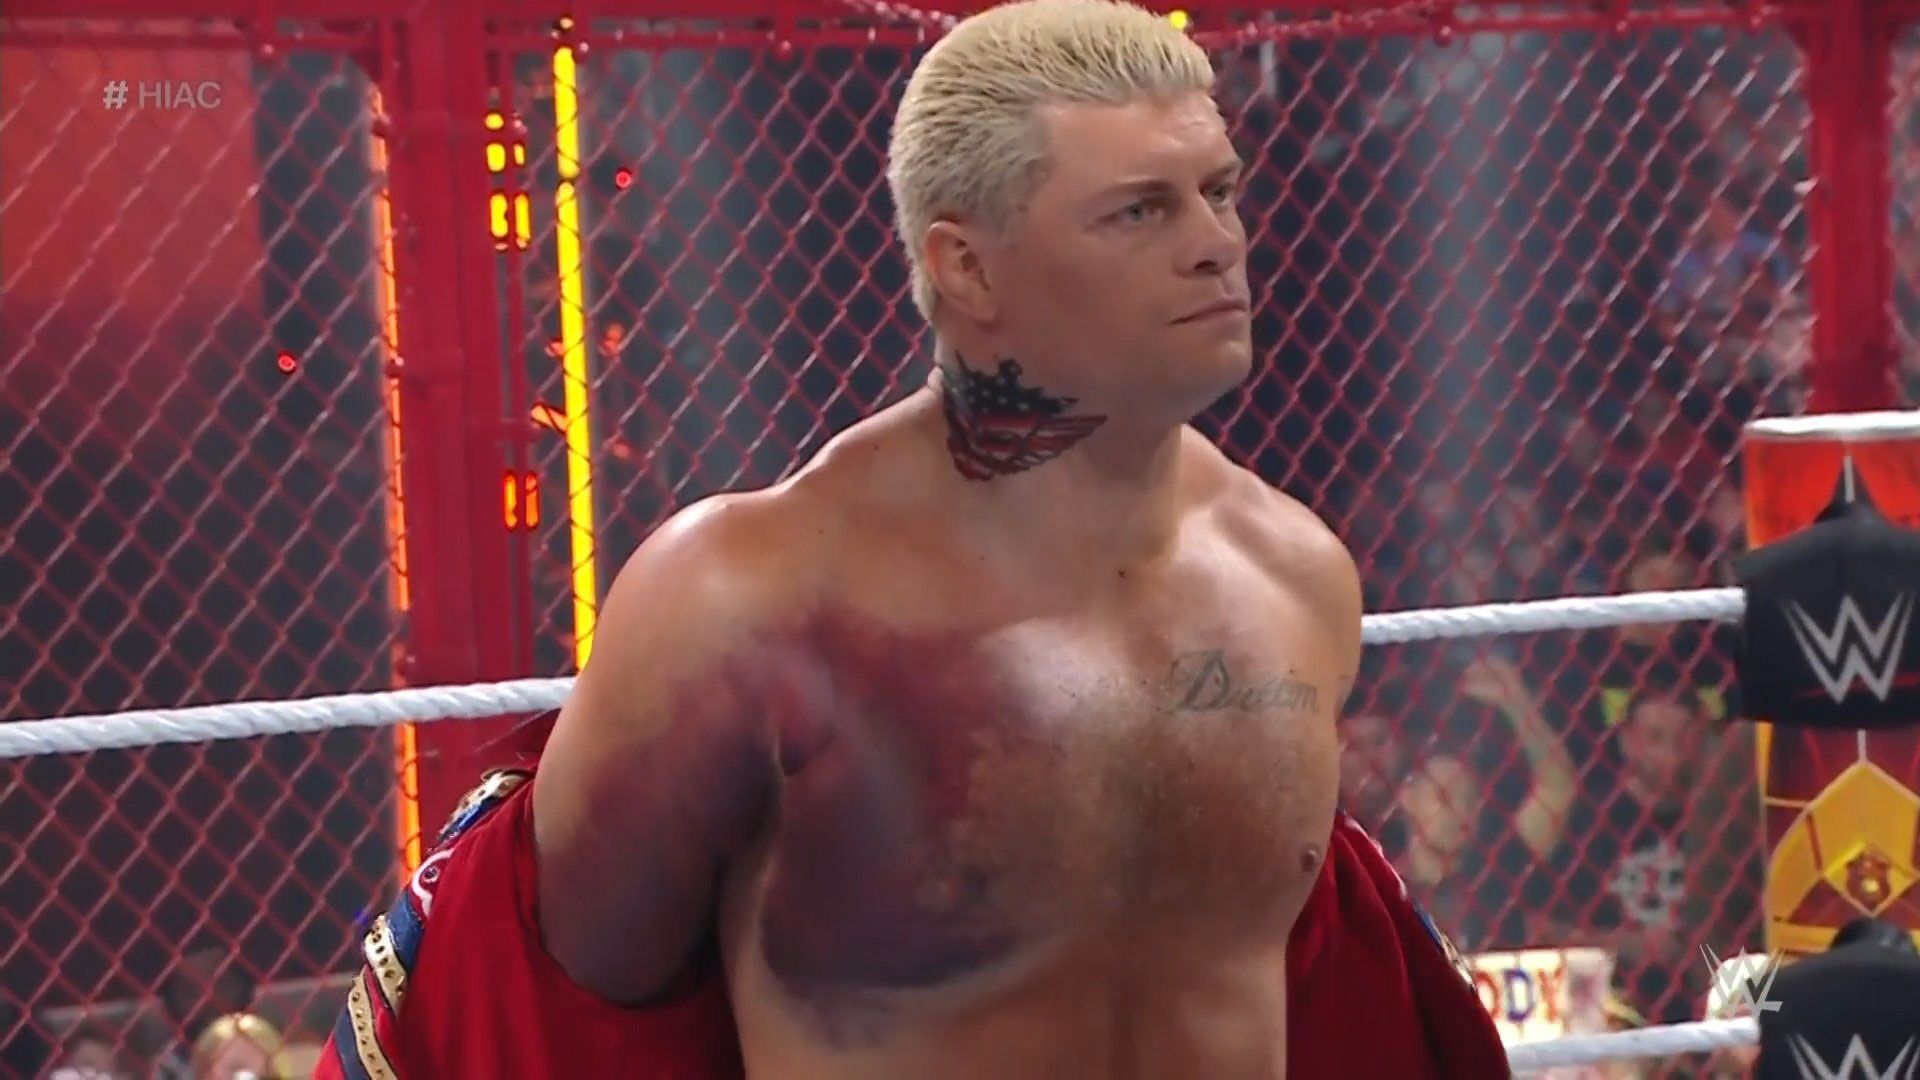 WWE star Cody Rhodes reveals gruesome injury minutes before fight